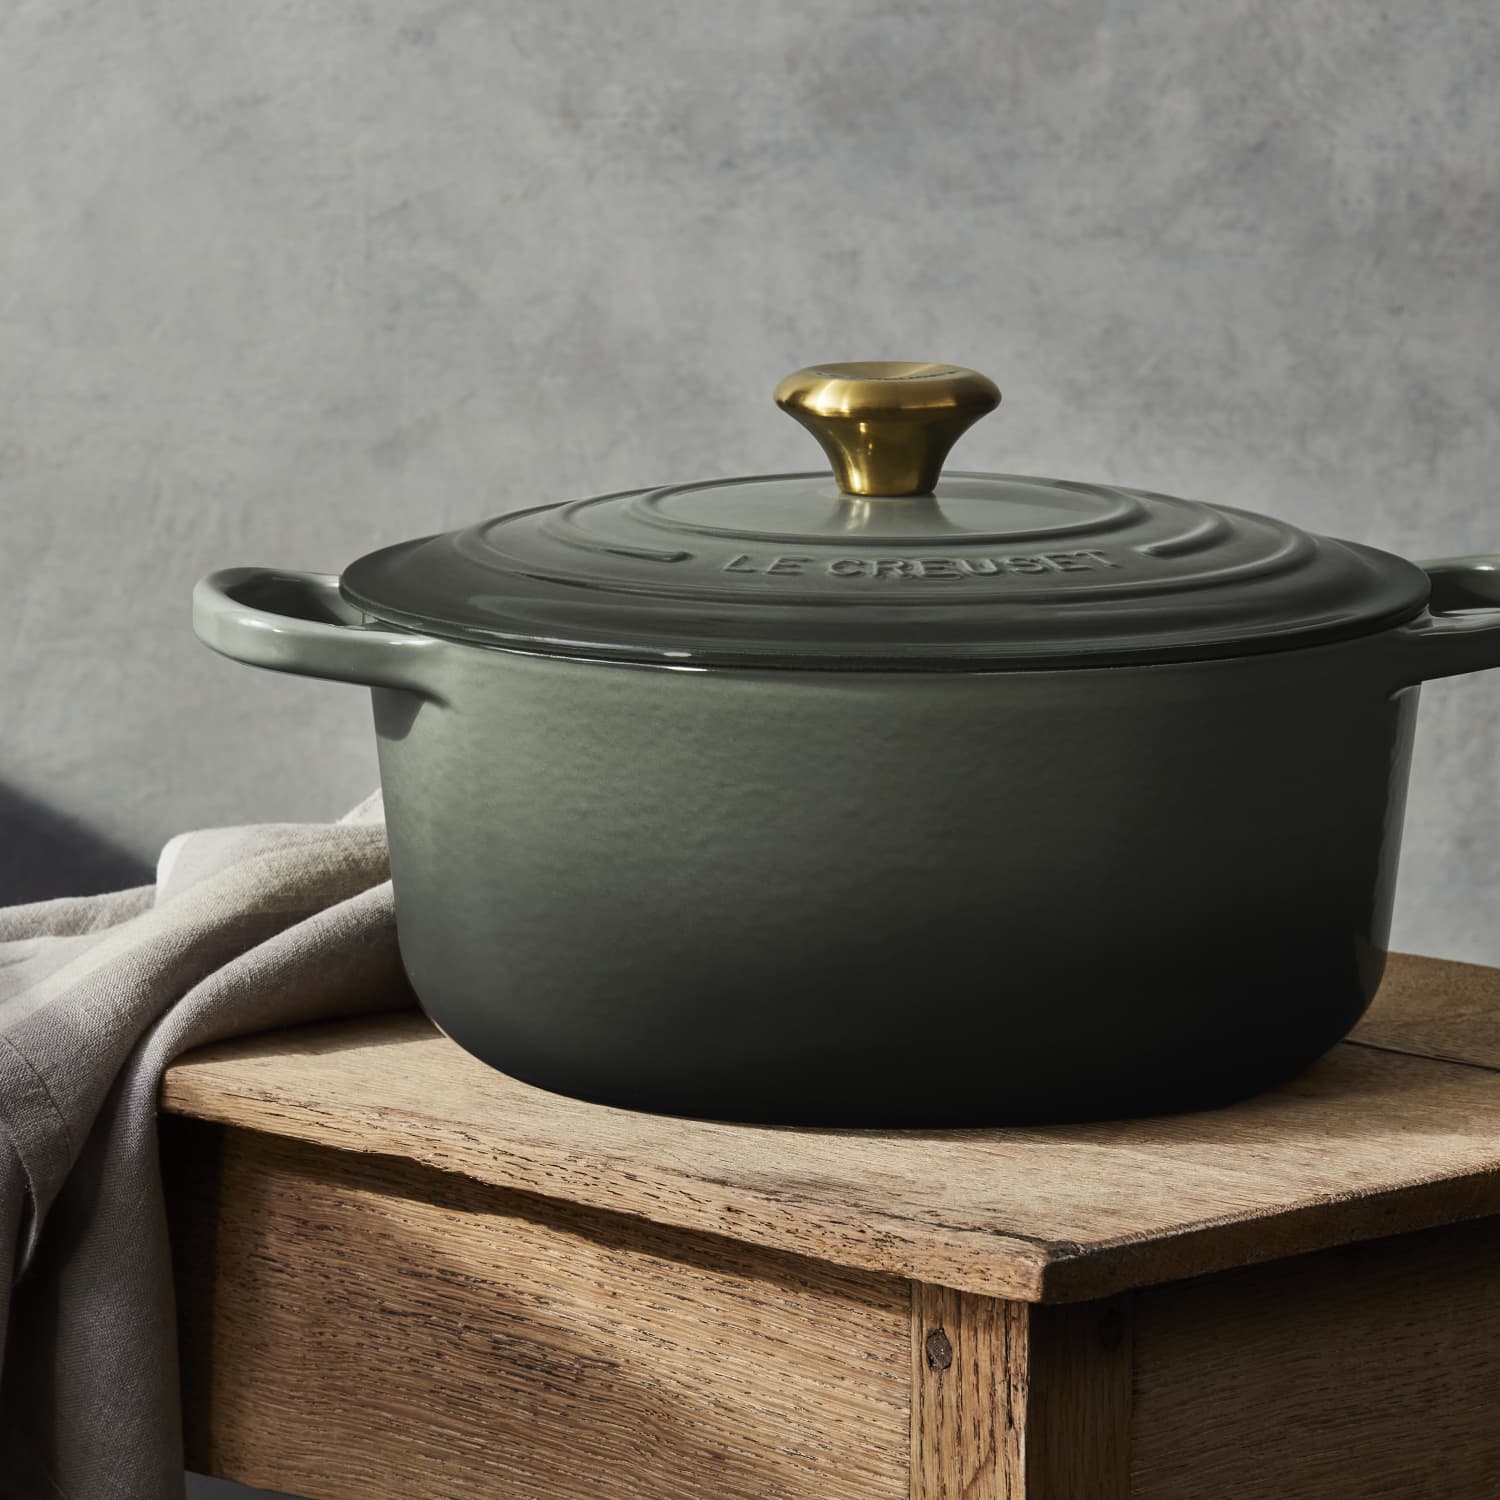 Slashed Prices on Dutch Ovens Ahead of Black Friday—These